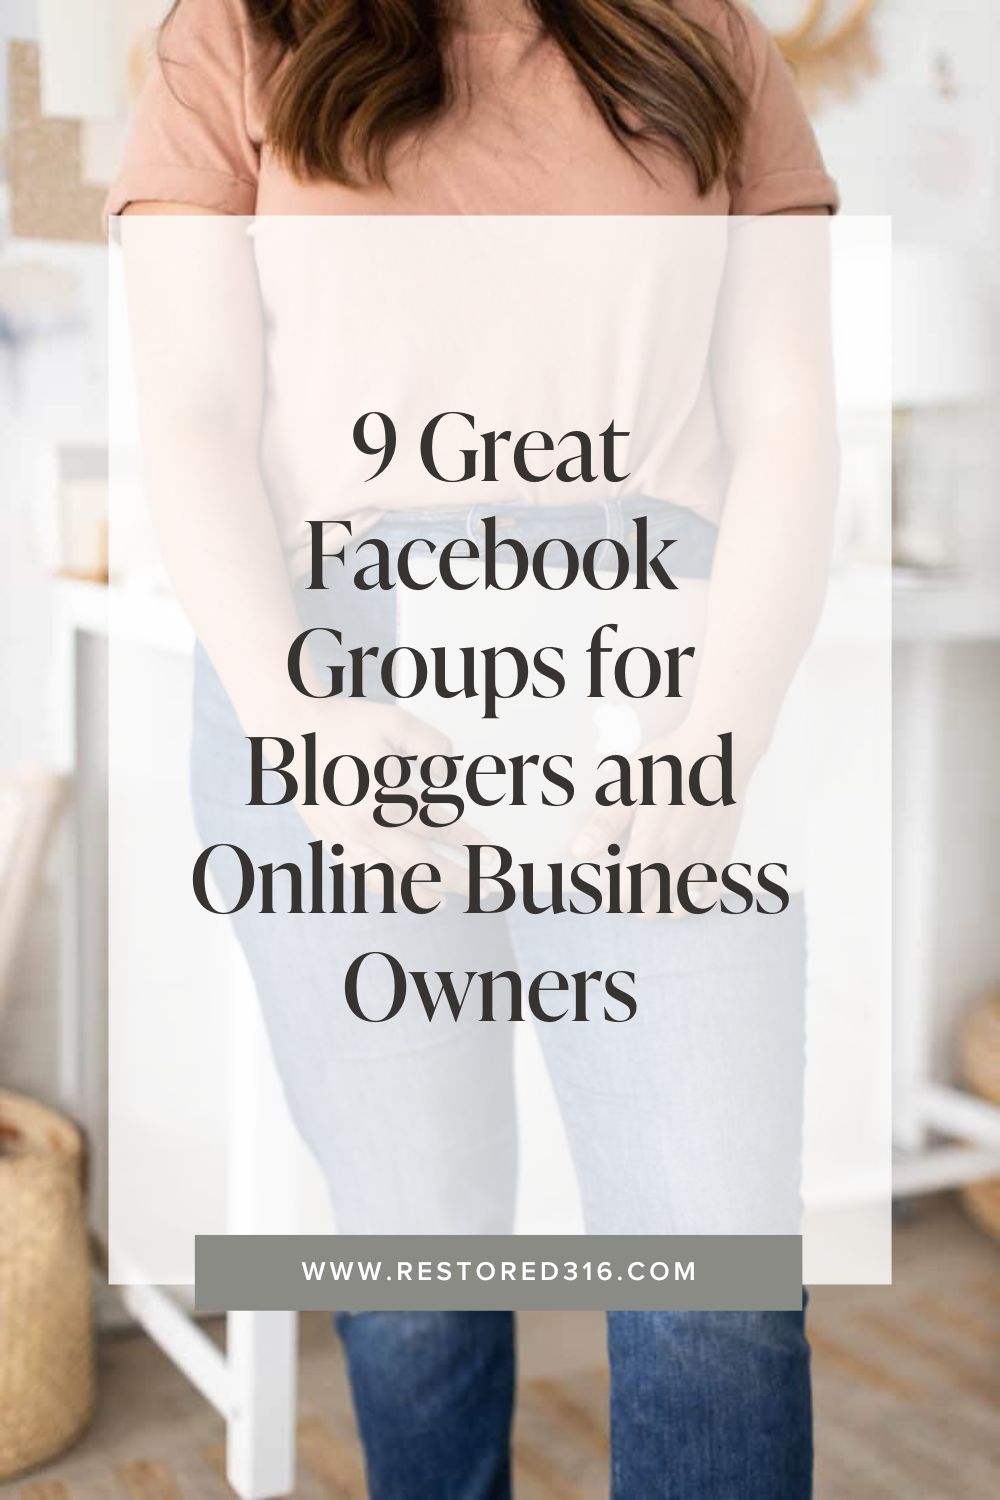 9 Great Facebook Groups for Bloggers and Online Business Owners